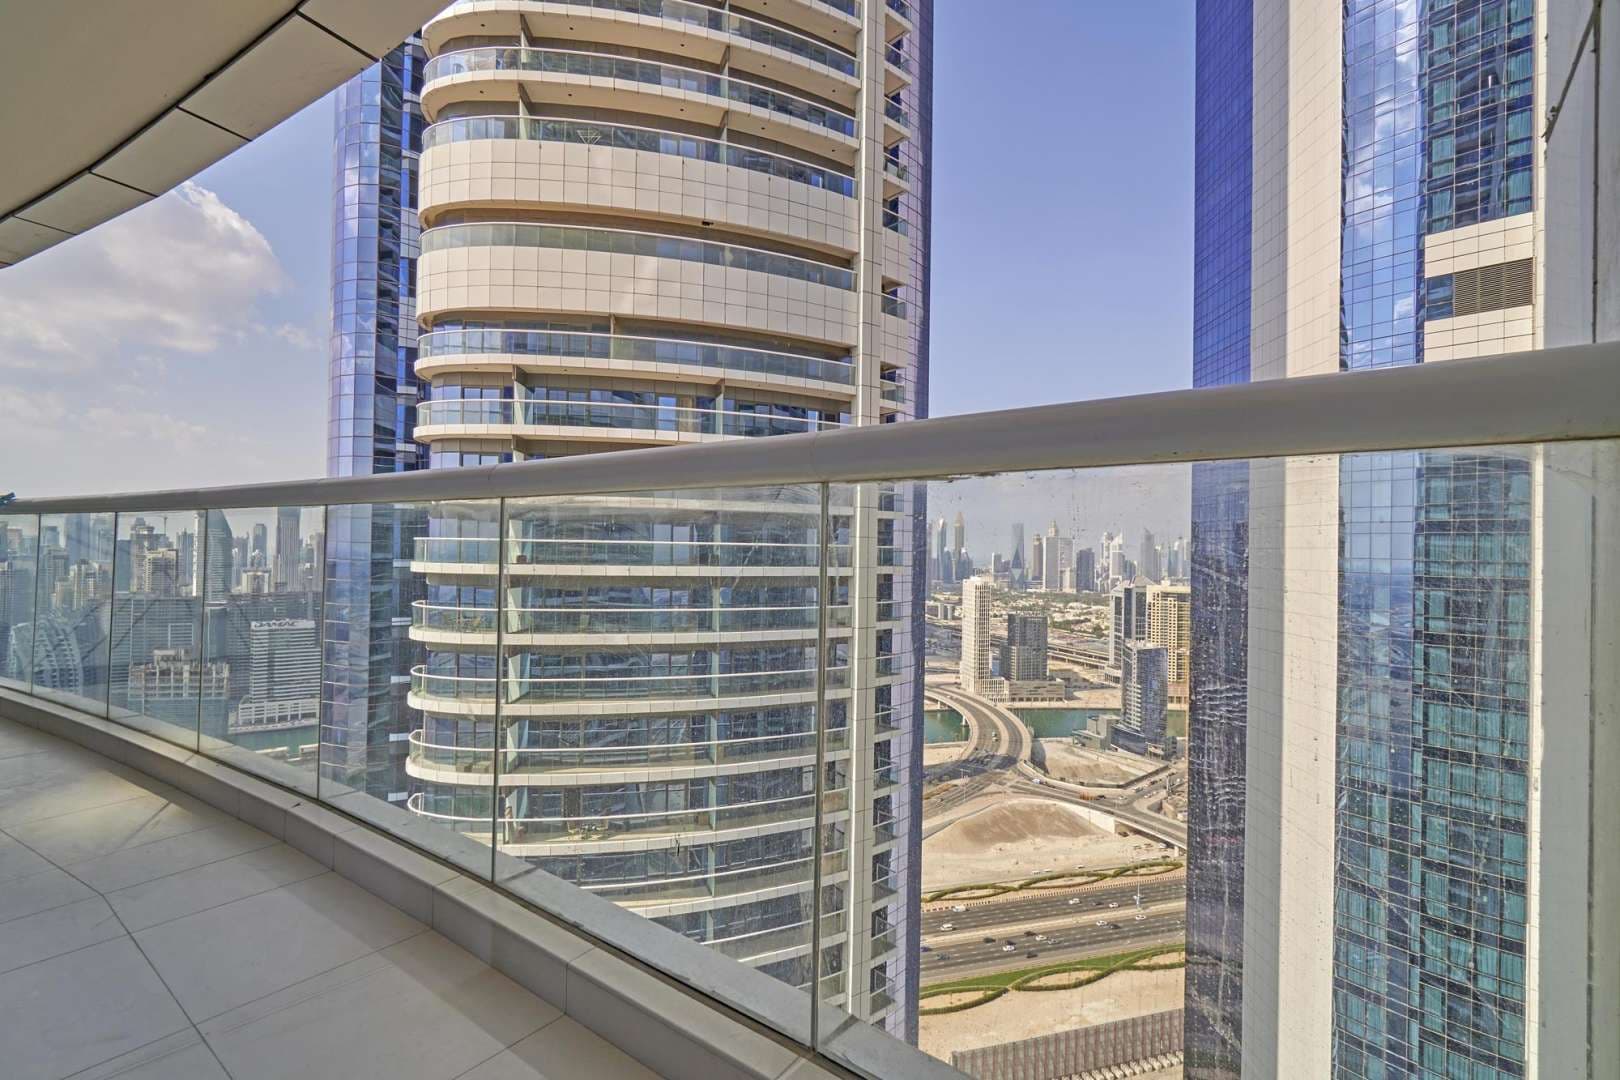 2 Bedroom Apartment For Rent Damac Towers By Paramount Lp05399 2ef03b77827a8800.jpg